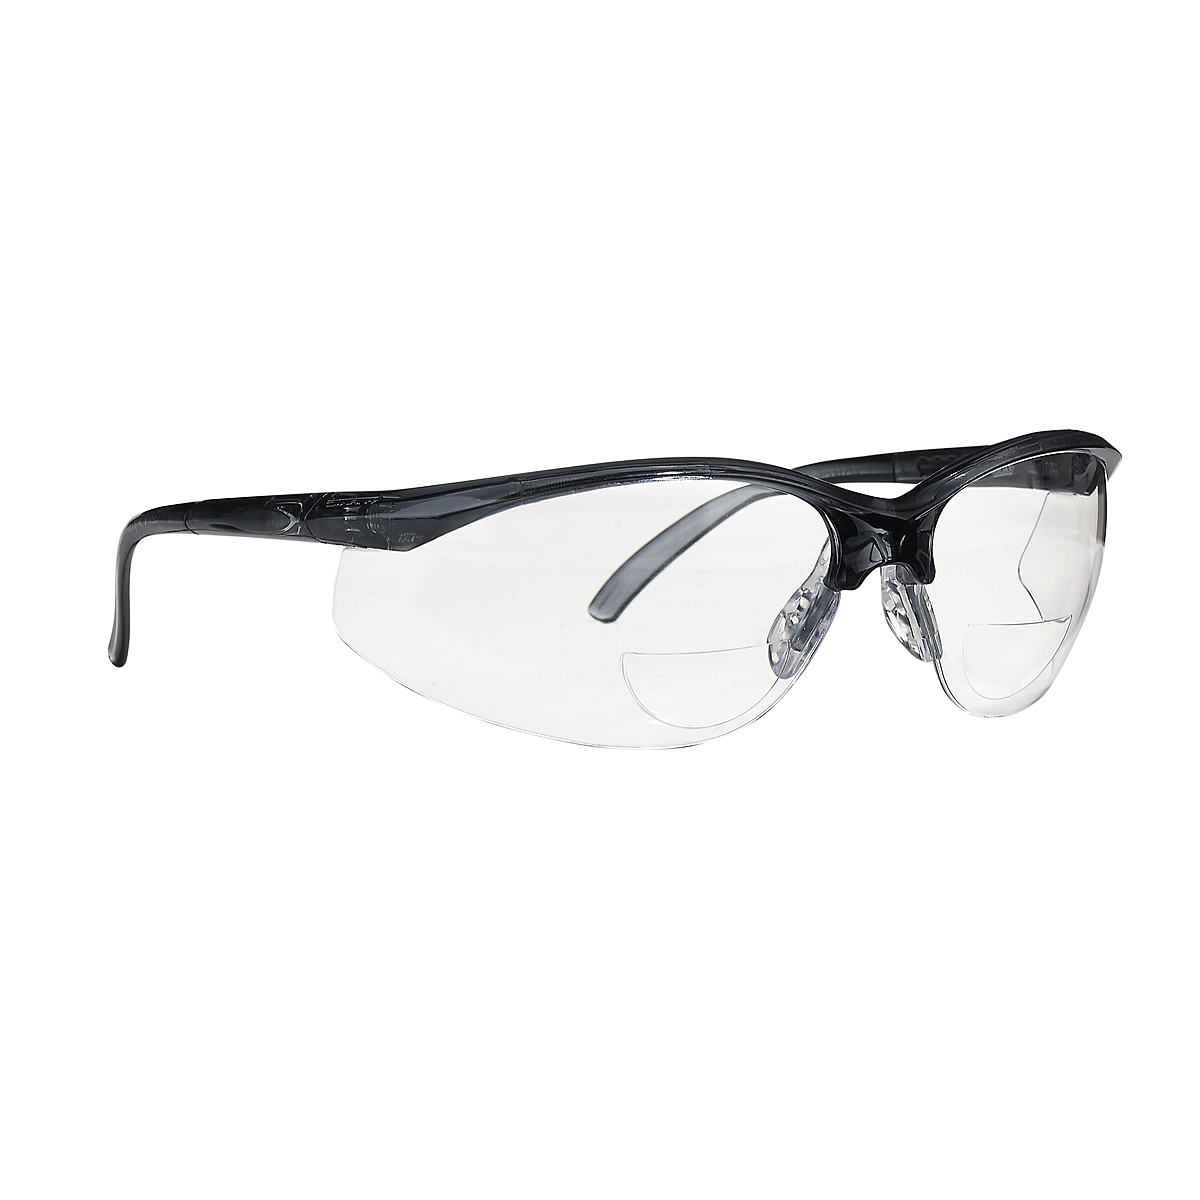 Safety Glasses, Anti-fog, Scratch-resistant, Anti-static, Uv, Diopter Len, Polycarbonate